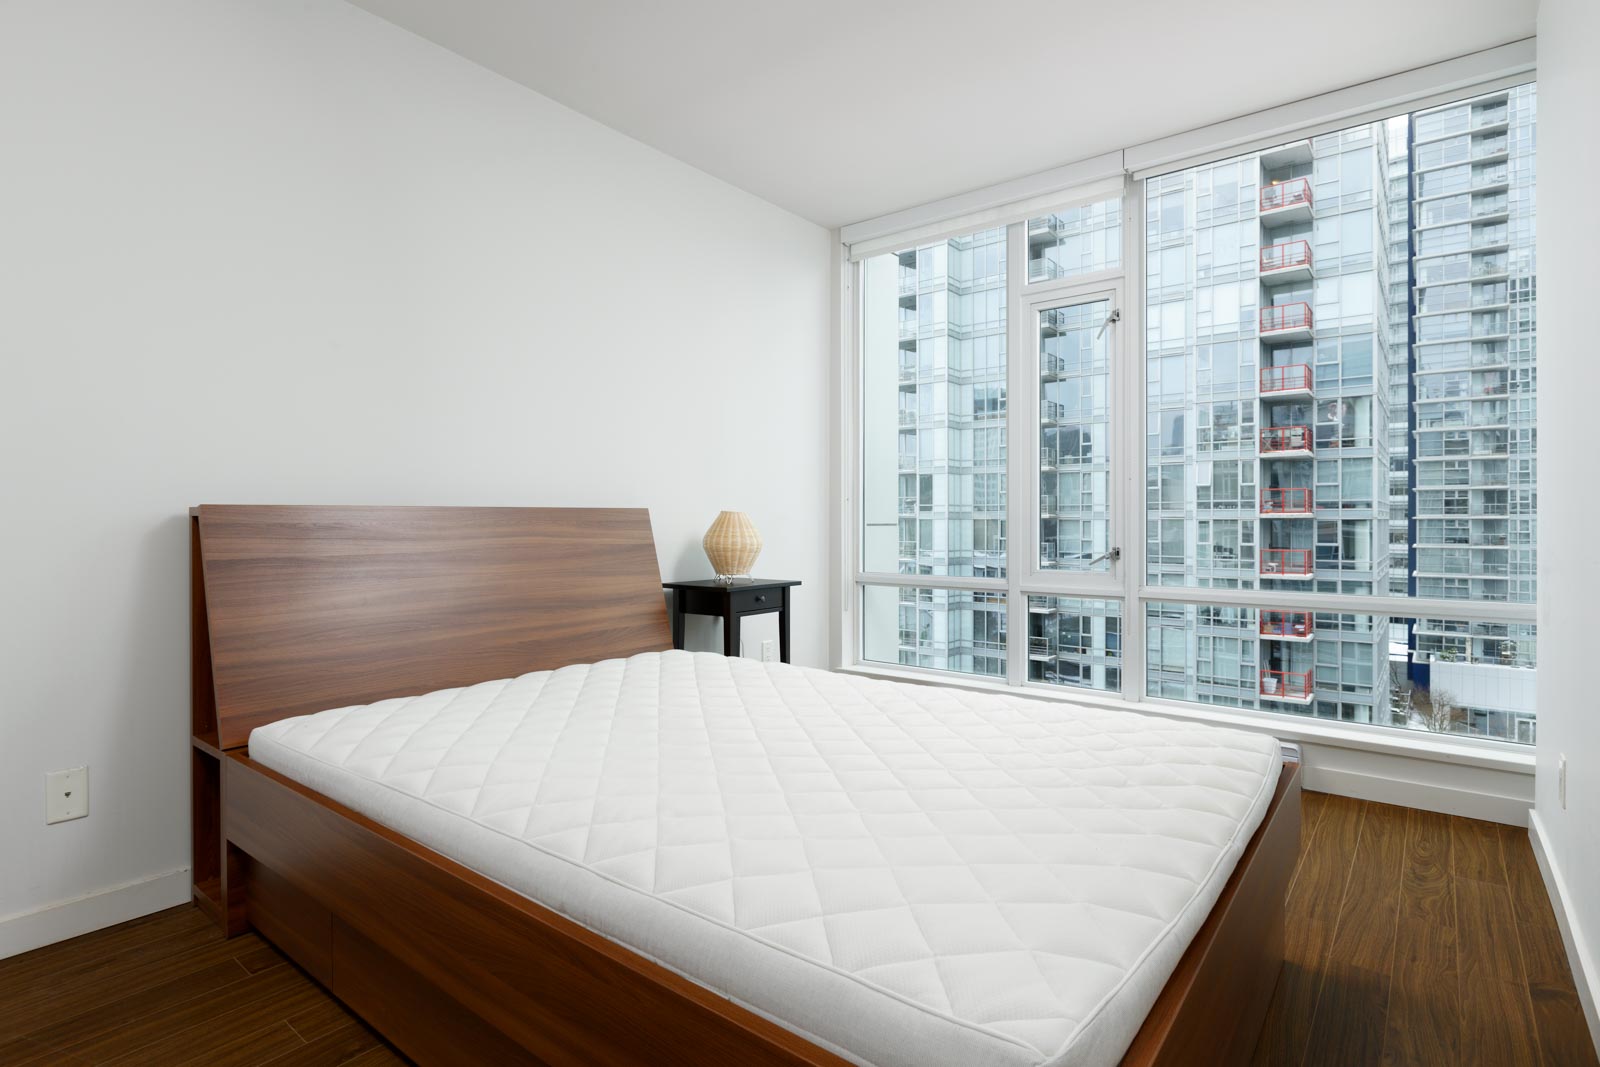 Bedroom with view at Downtown Vancouver condo rental.